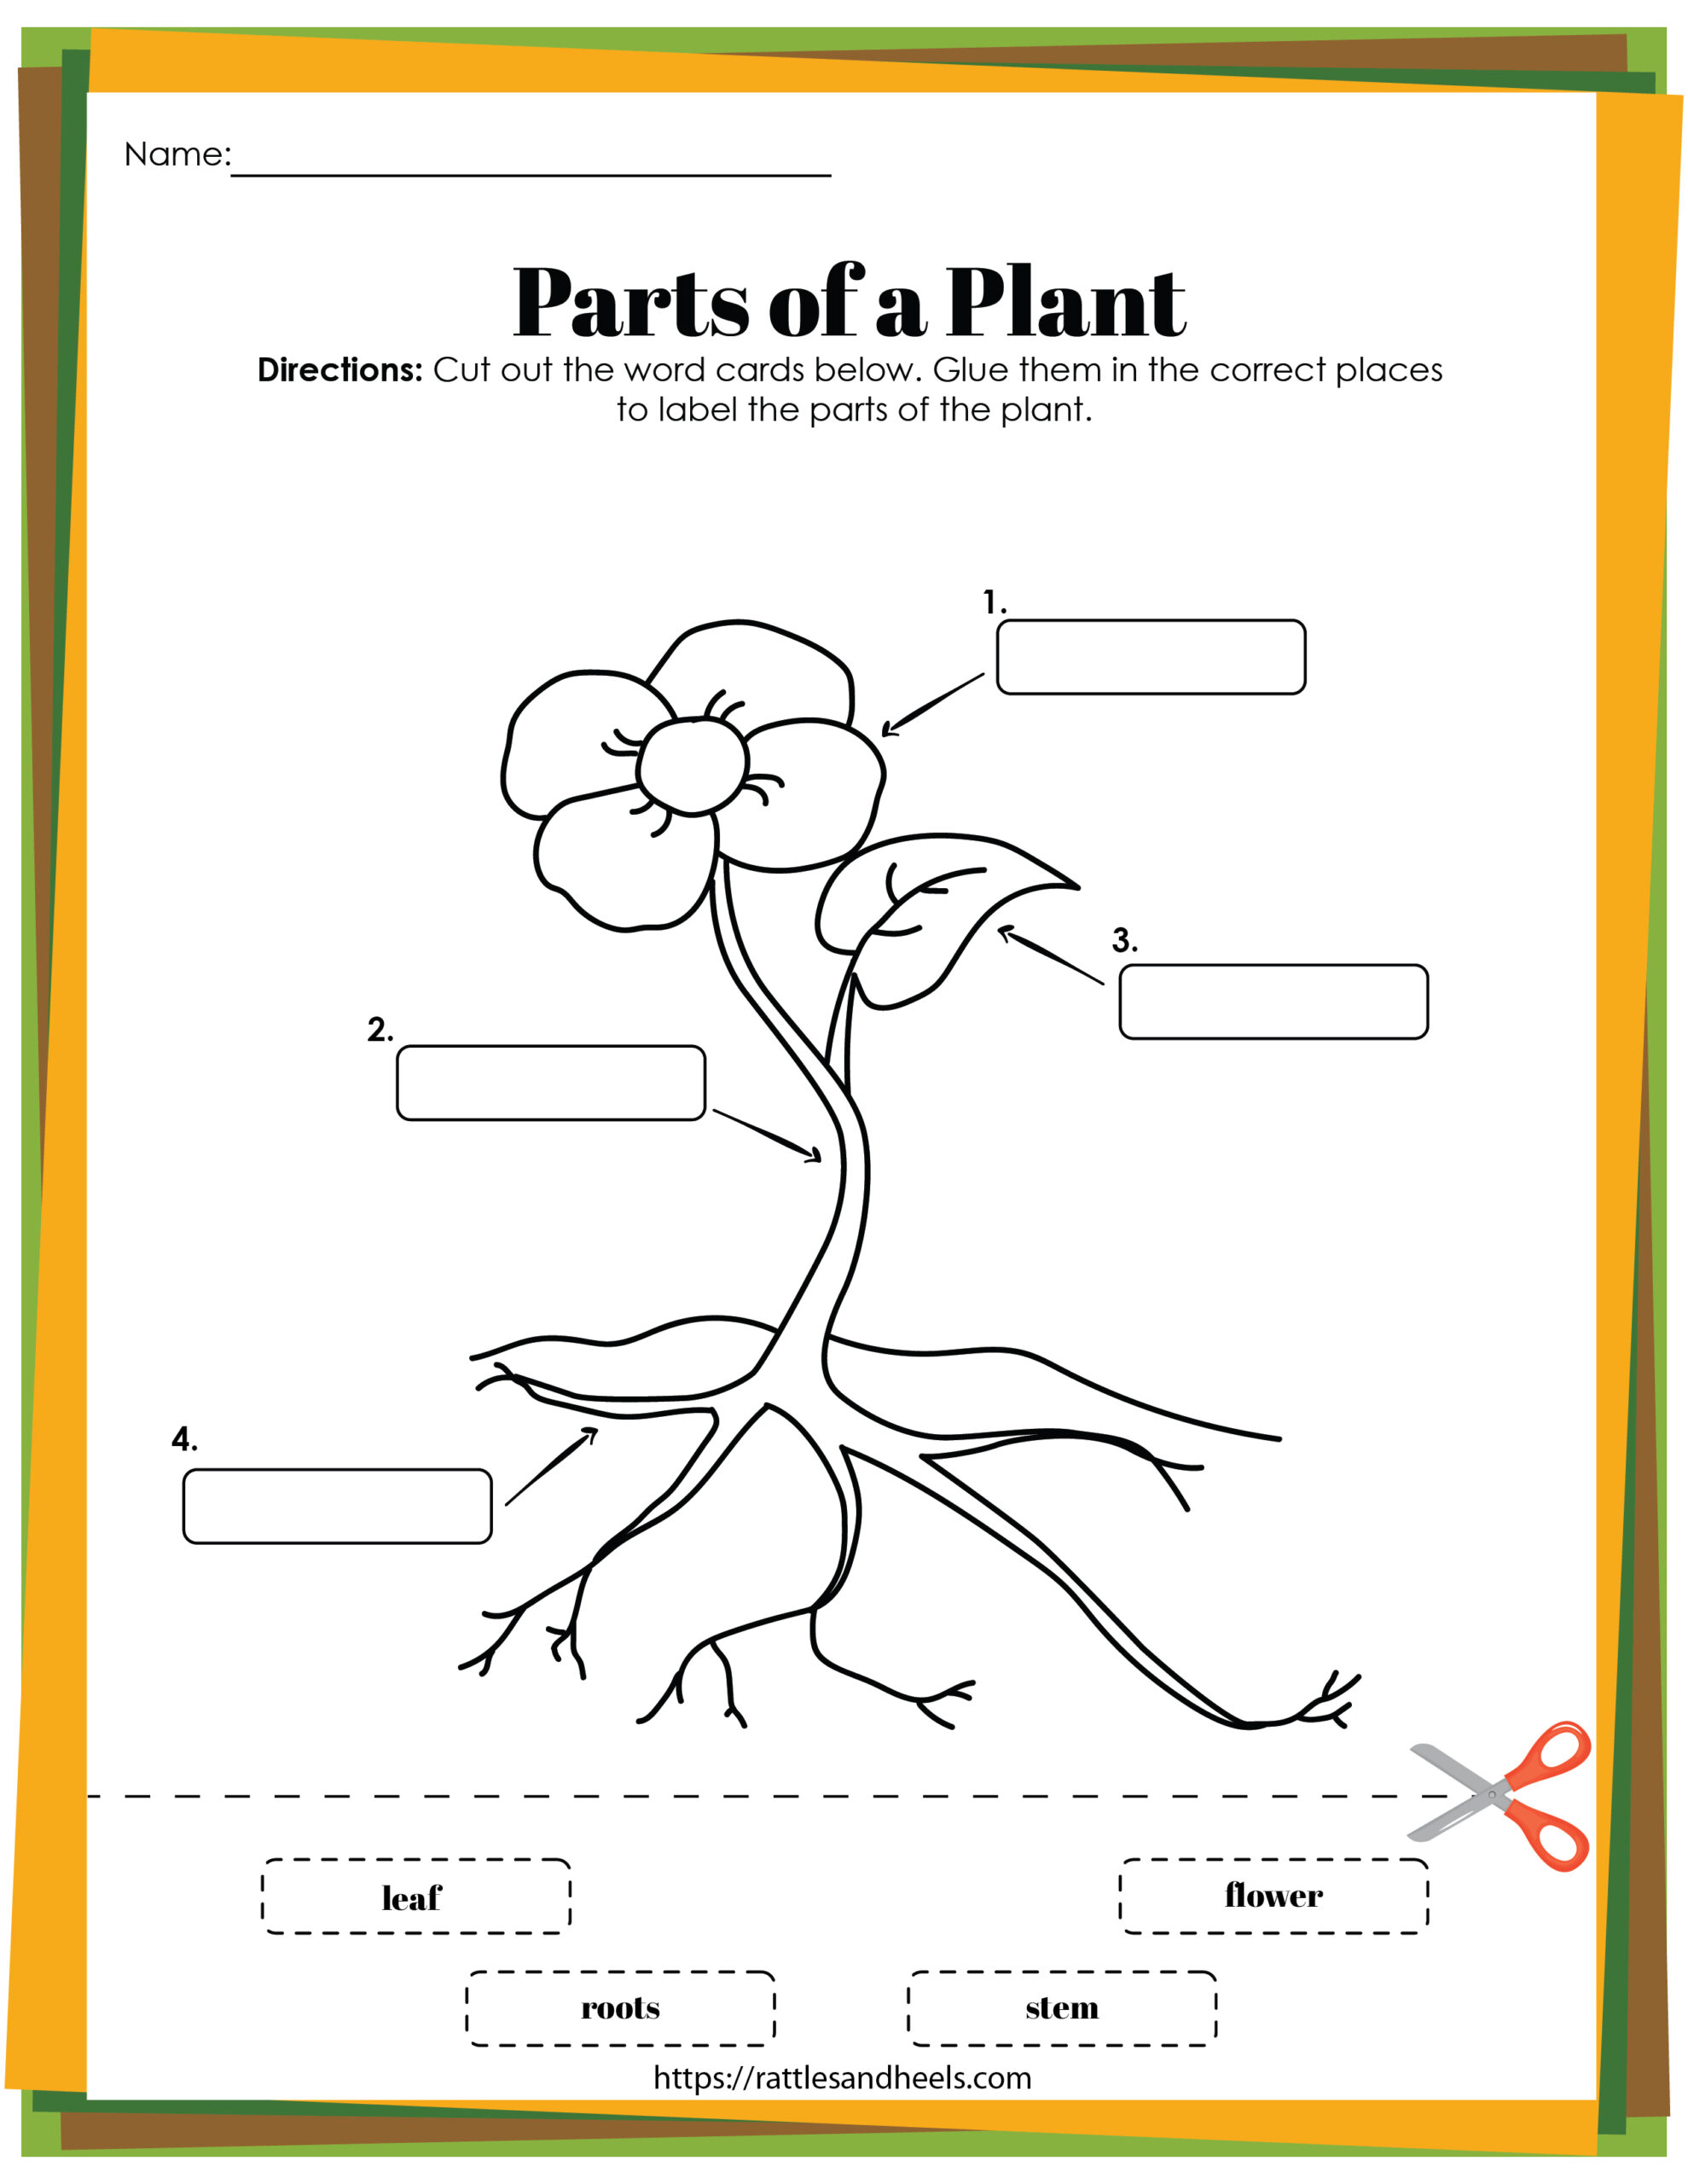 parts-of-a-plant-worksheets-free-printable-plant-life-cycle